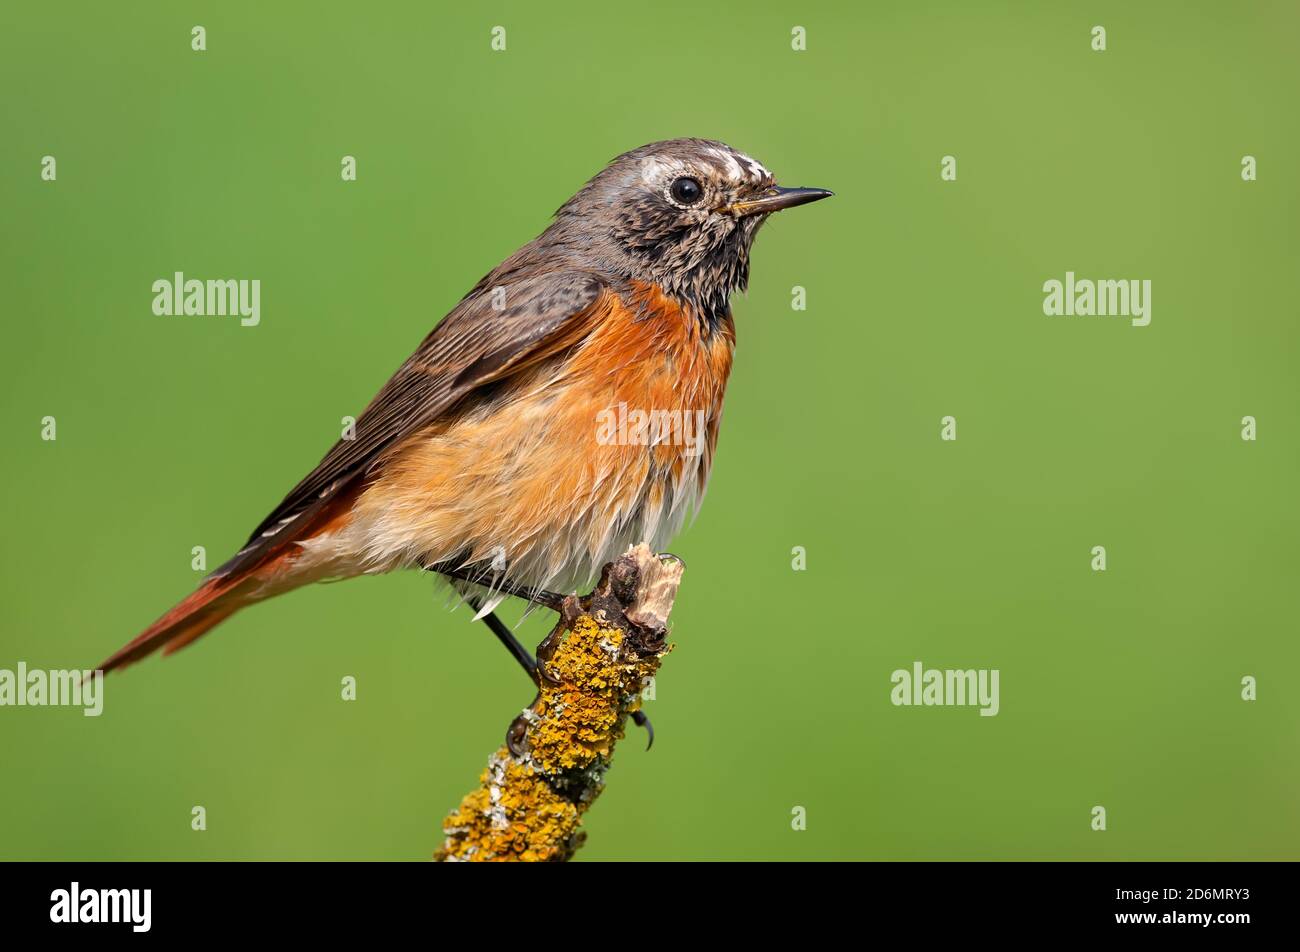 Common redstart (phoenicurus phoenicurus) perched on small lichen stick with clean green background Stock Photo